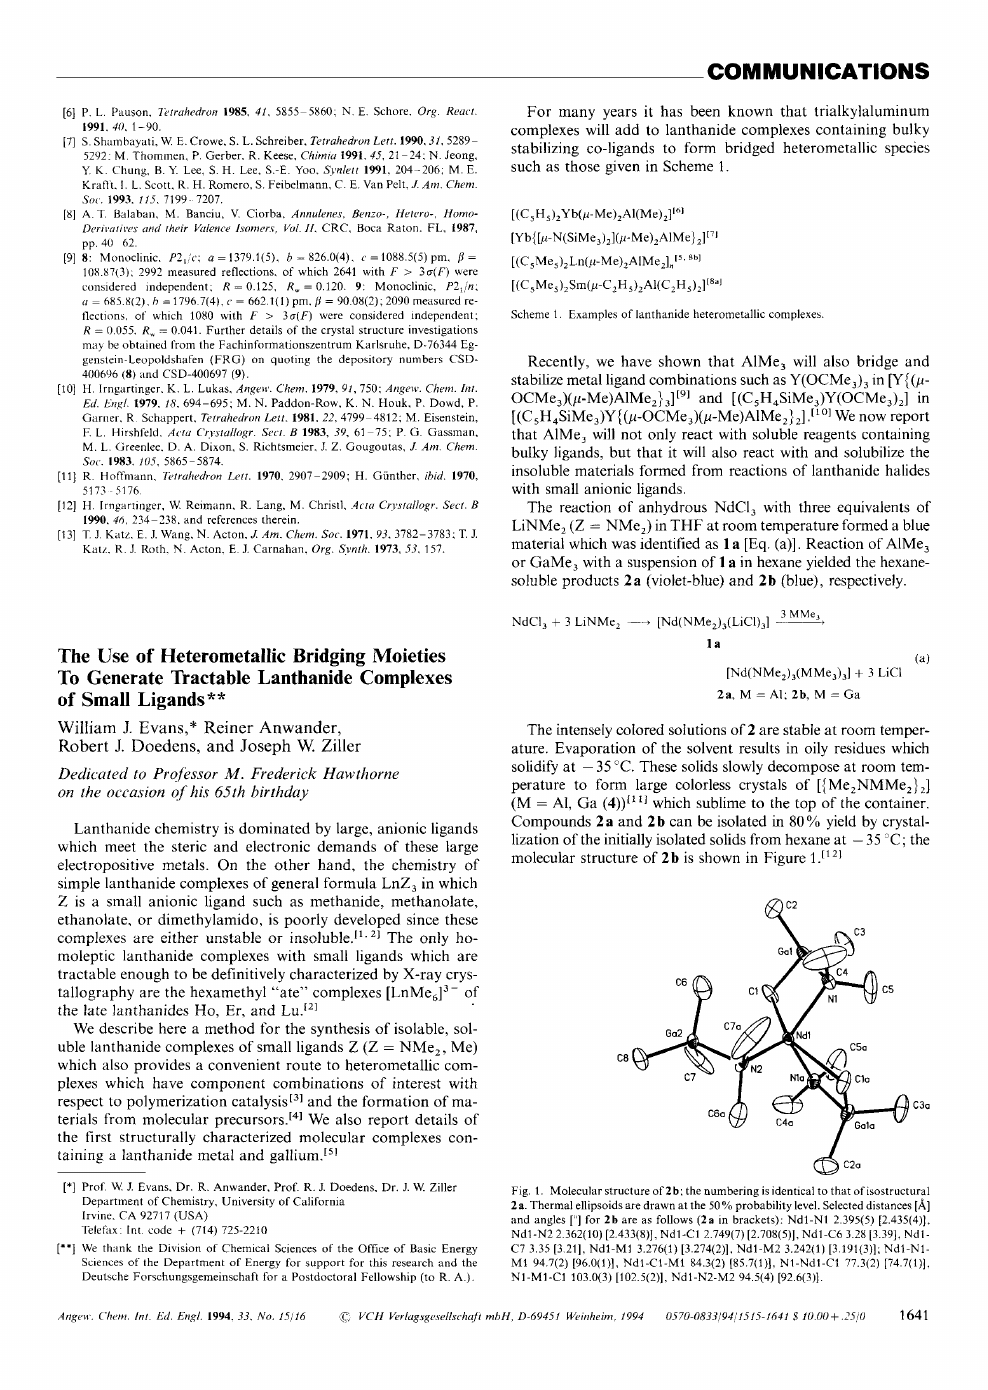 The Use Of Heterometallic Bridging Moieties To Generate Tractable Lanthanide Complexes Of Small Ligands Topic Of Research Paper In Chemical Sciences Download Scholarly Article Pdf And Read For Free On Cyberleninka